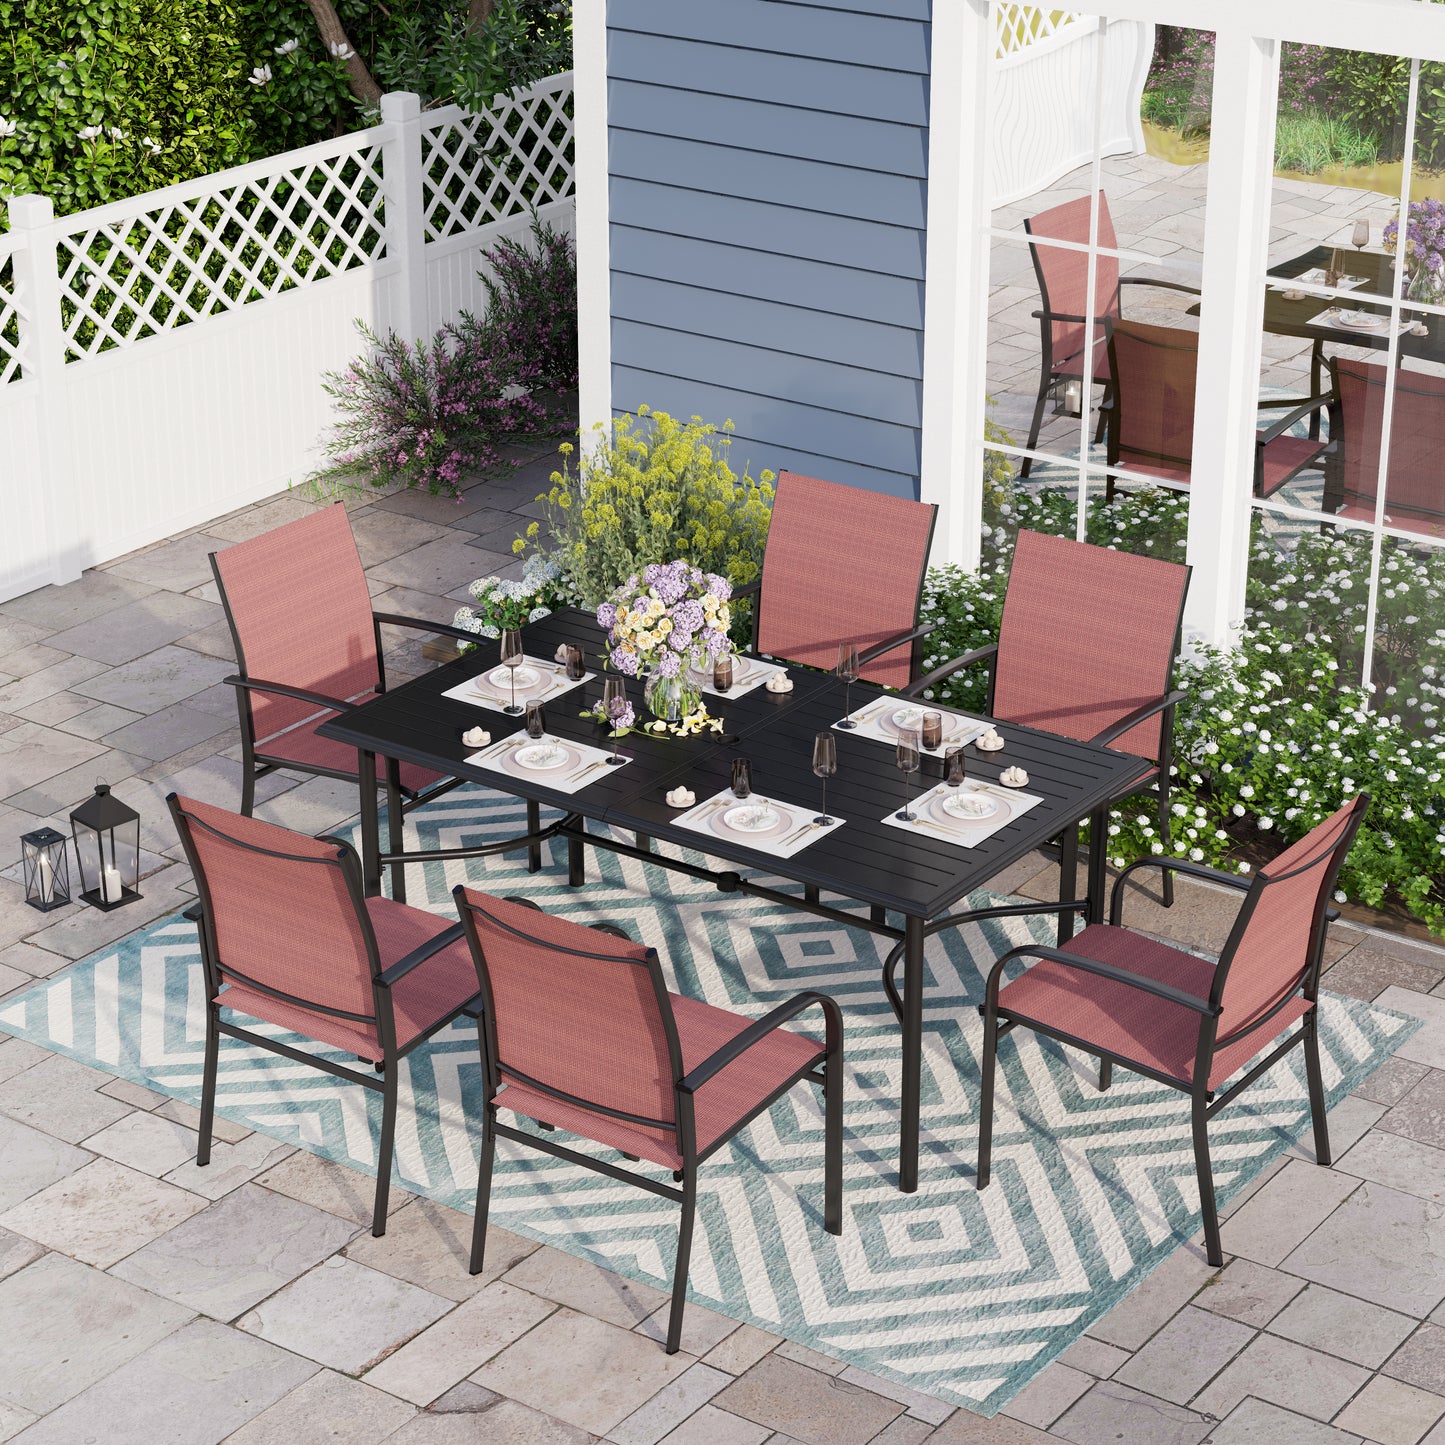 Sophia & William 7 Piece Patio Metal Dining Set 67" Dining Table and 6 Red Textilene Chairs